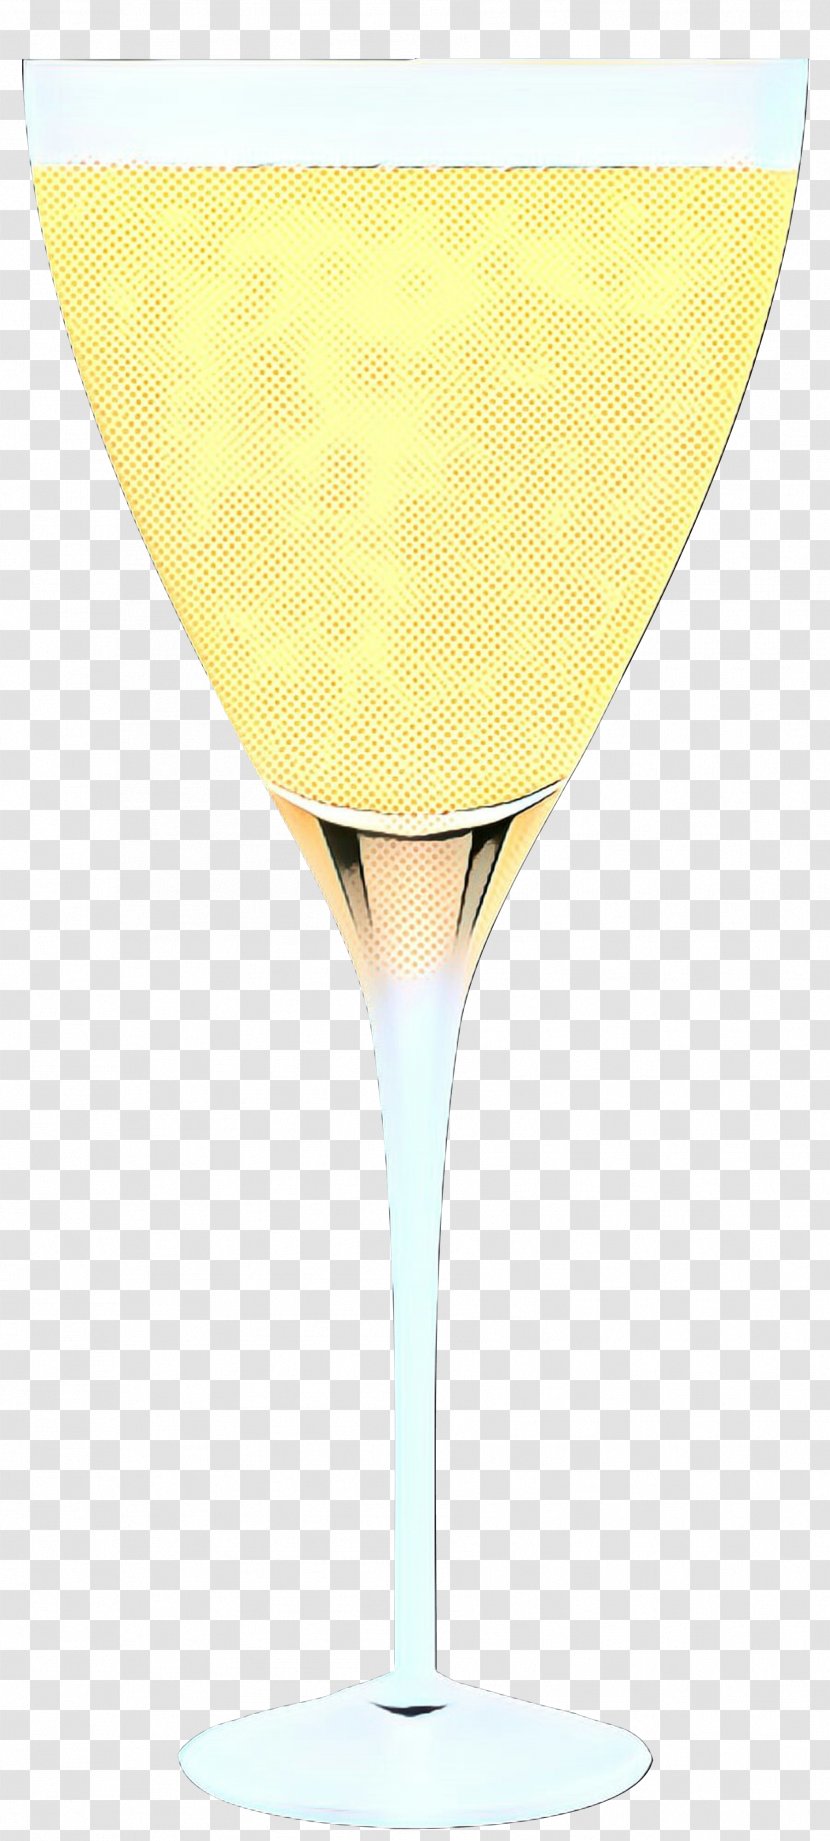 Wine Glass Cocktail Martini Champagne Transparent PNG